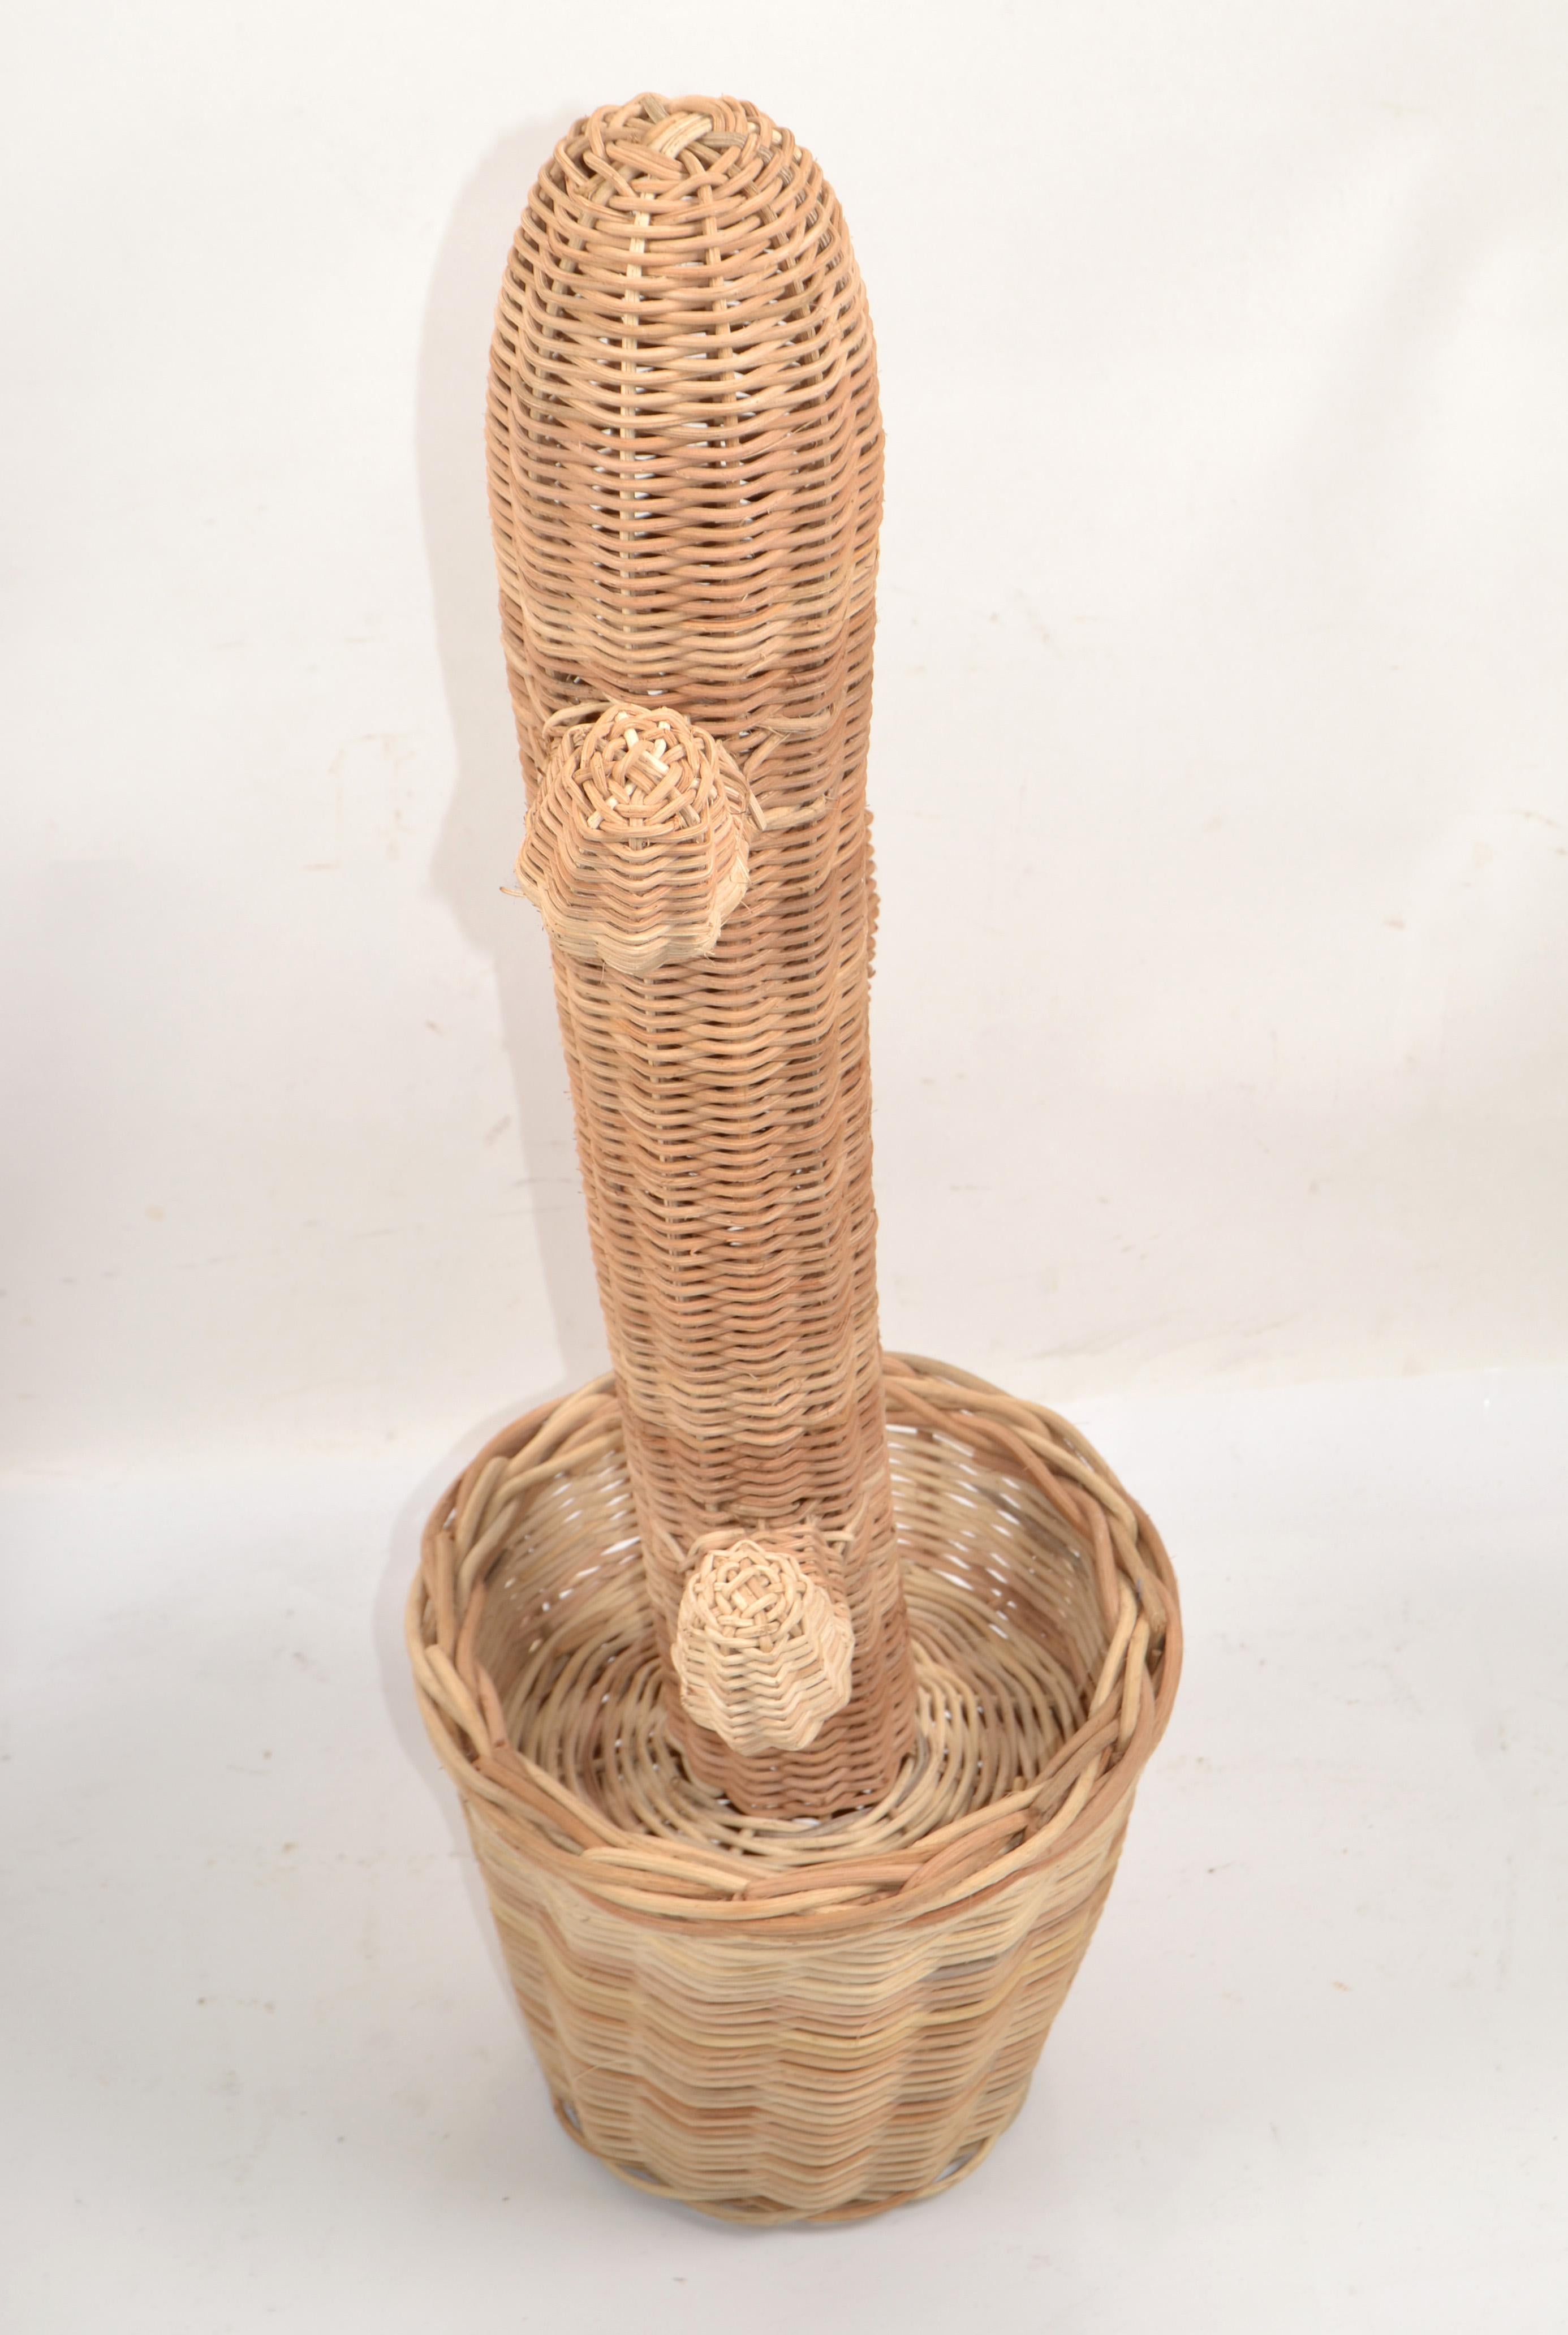 Mario Lopez Torres Style Hand-Woven Rattan Cactus Pot Sculpture 1970 Bohemian  In Good Condition For Sale In Miami, FL